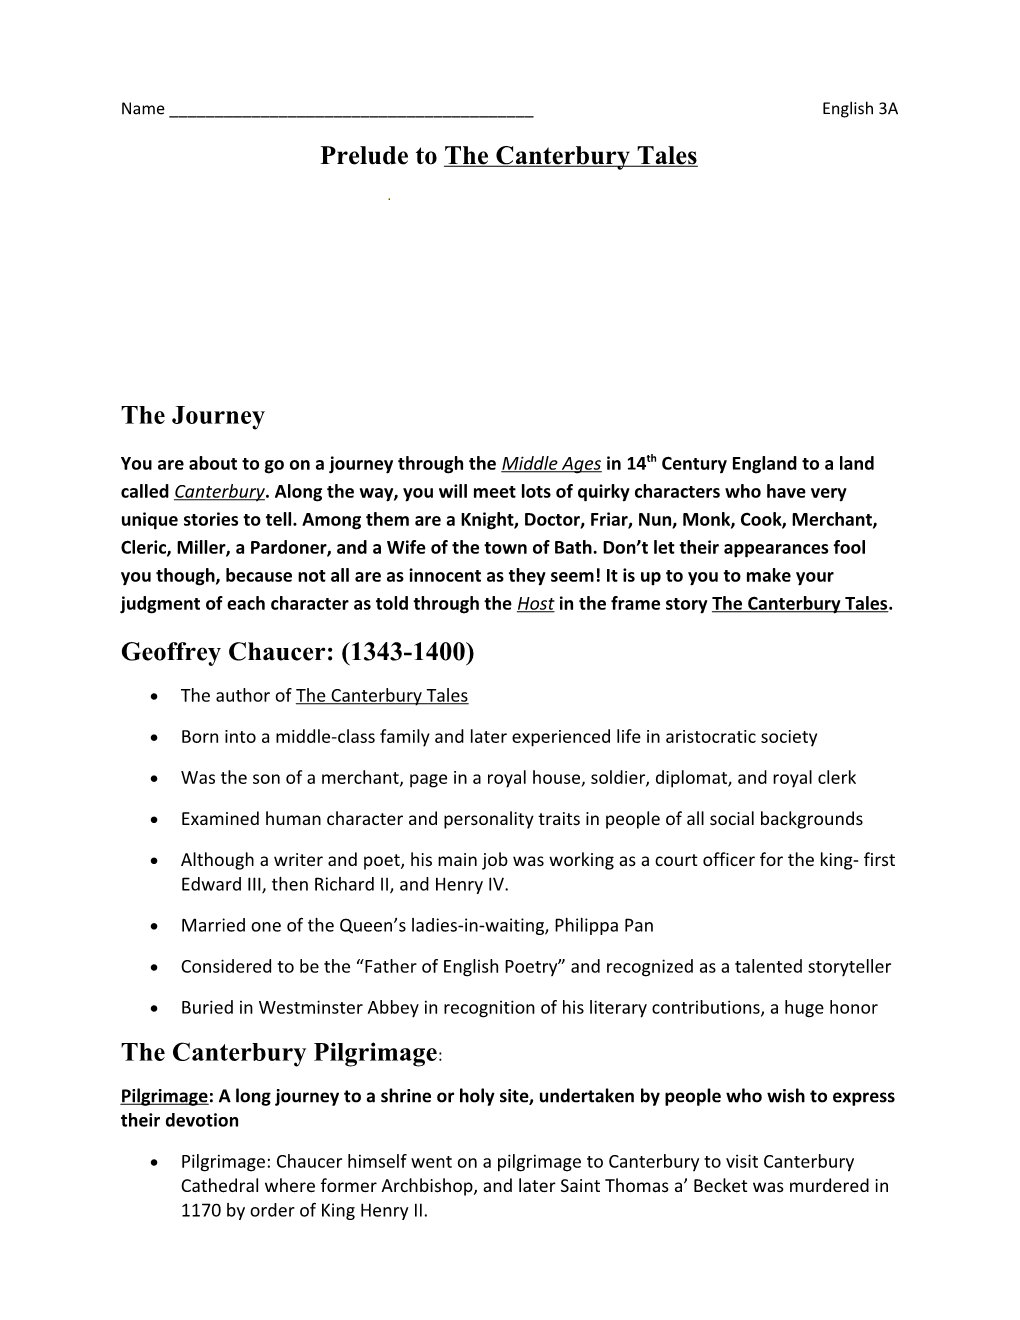 Prelude to the Canterbury Tales